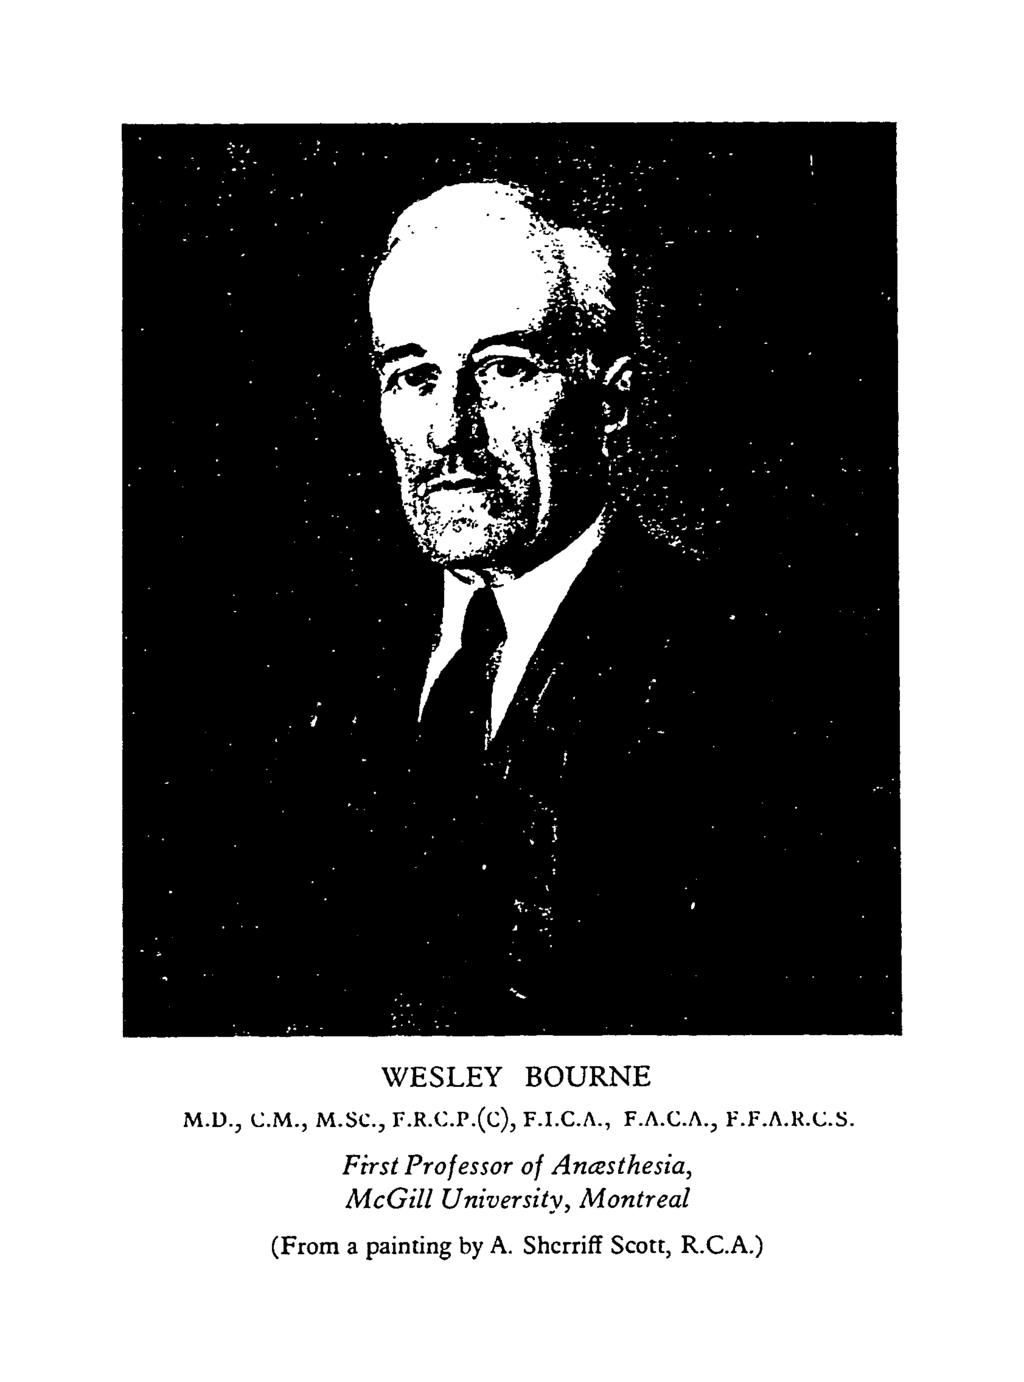 WESLEY BOURNE M.D., CM., M.SC, F.R.C.P.(C), F.I.C.A., F.A.C.A., F.F.A.K.C.S. First Professor of Ancesthesia, McGill University, Montreal (From a painting by A.